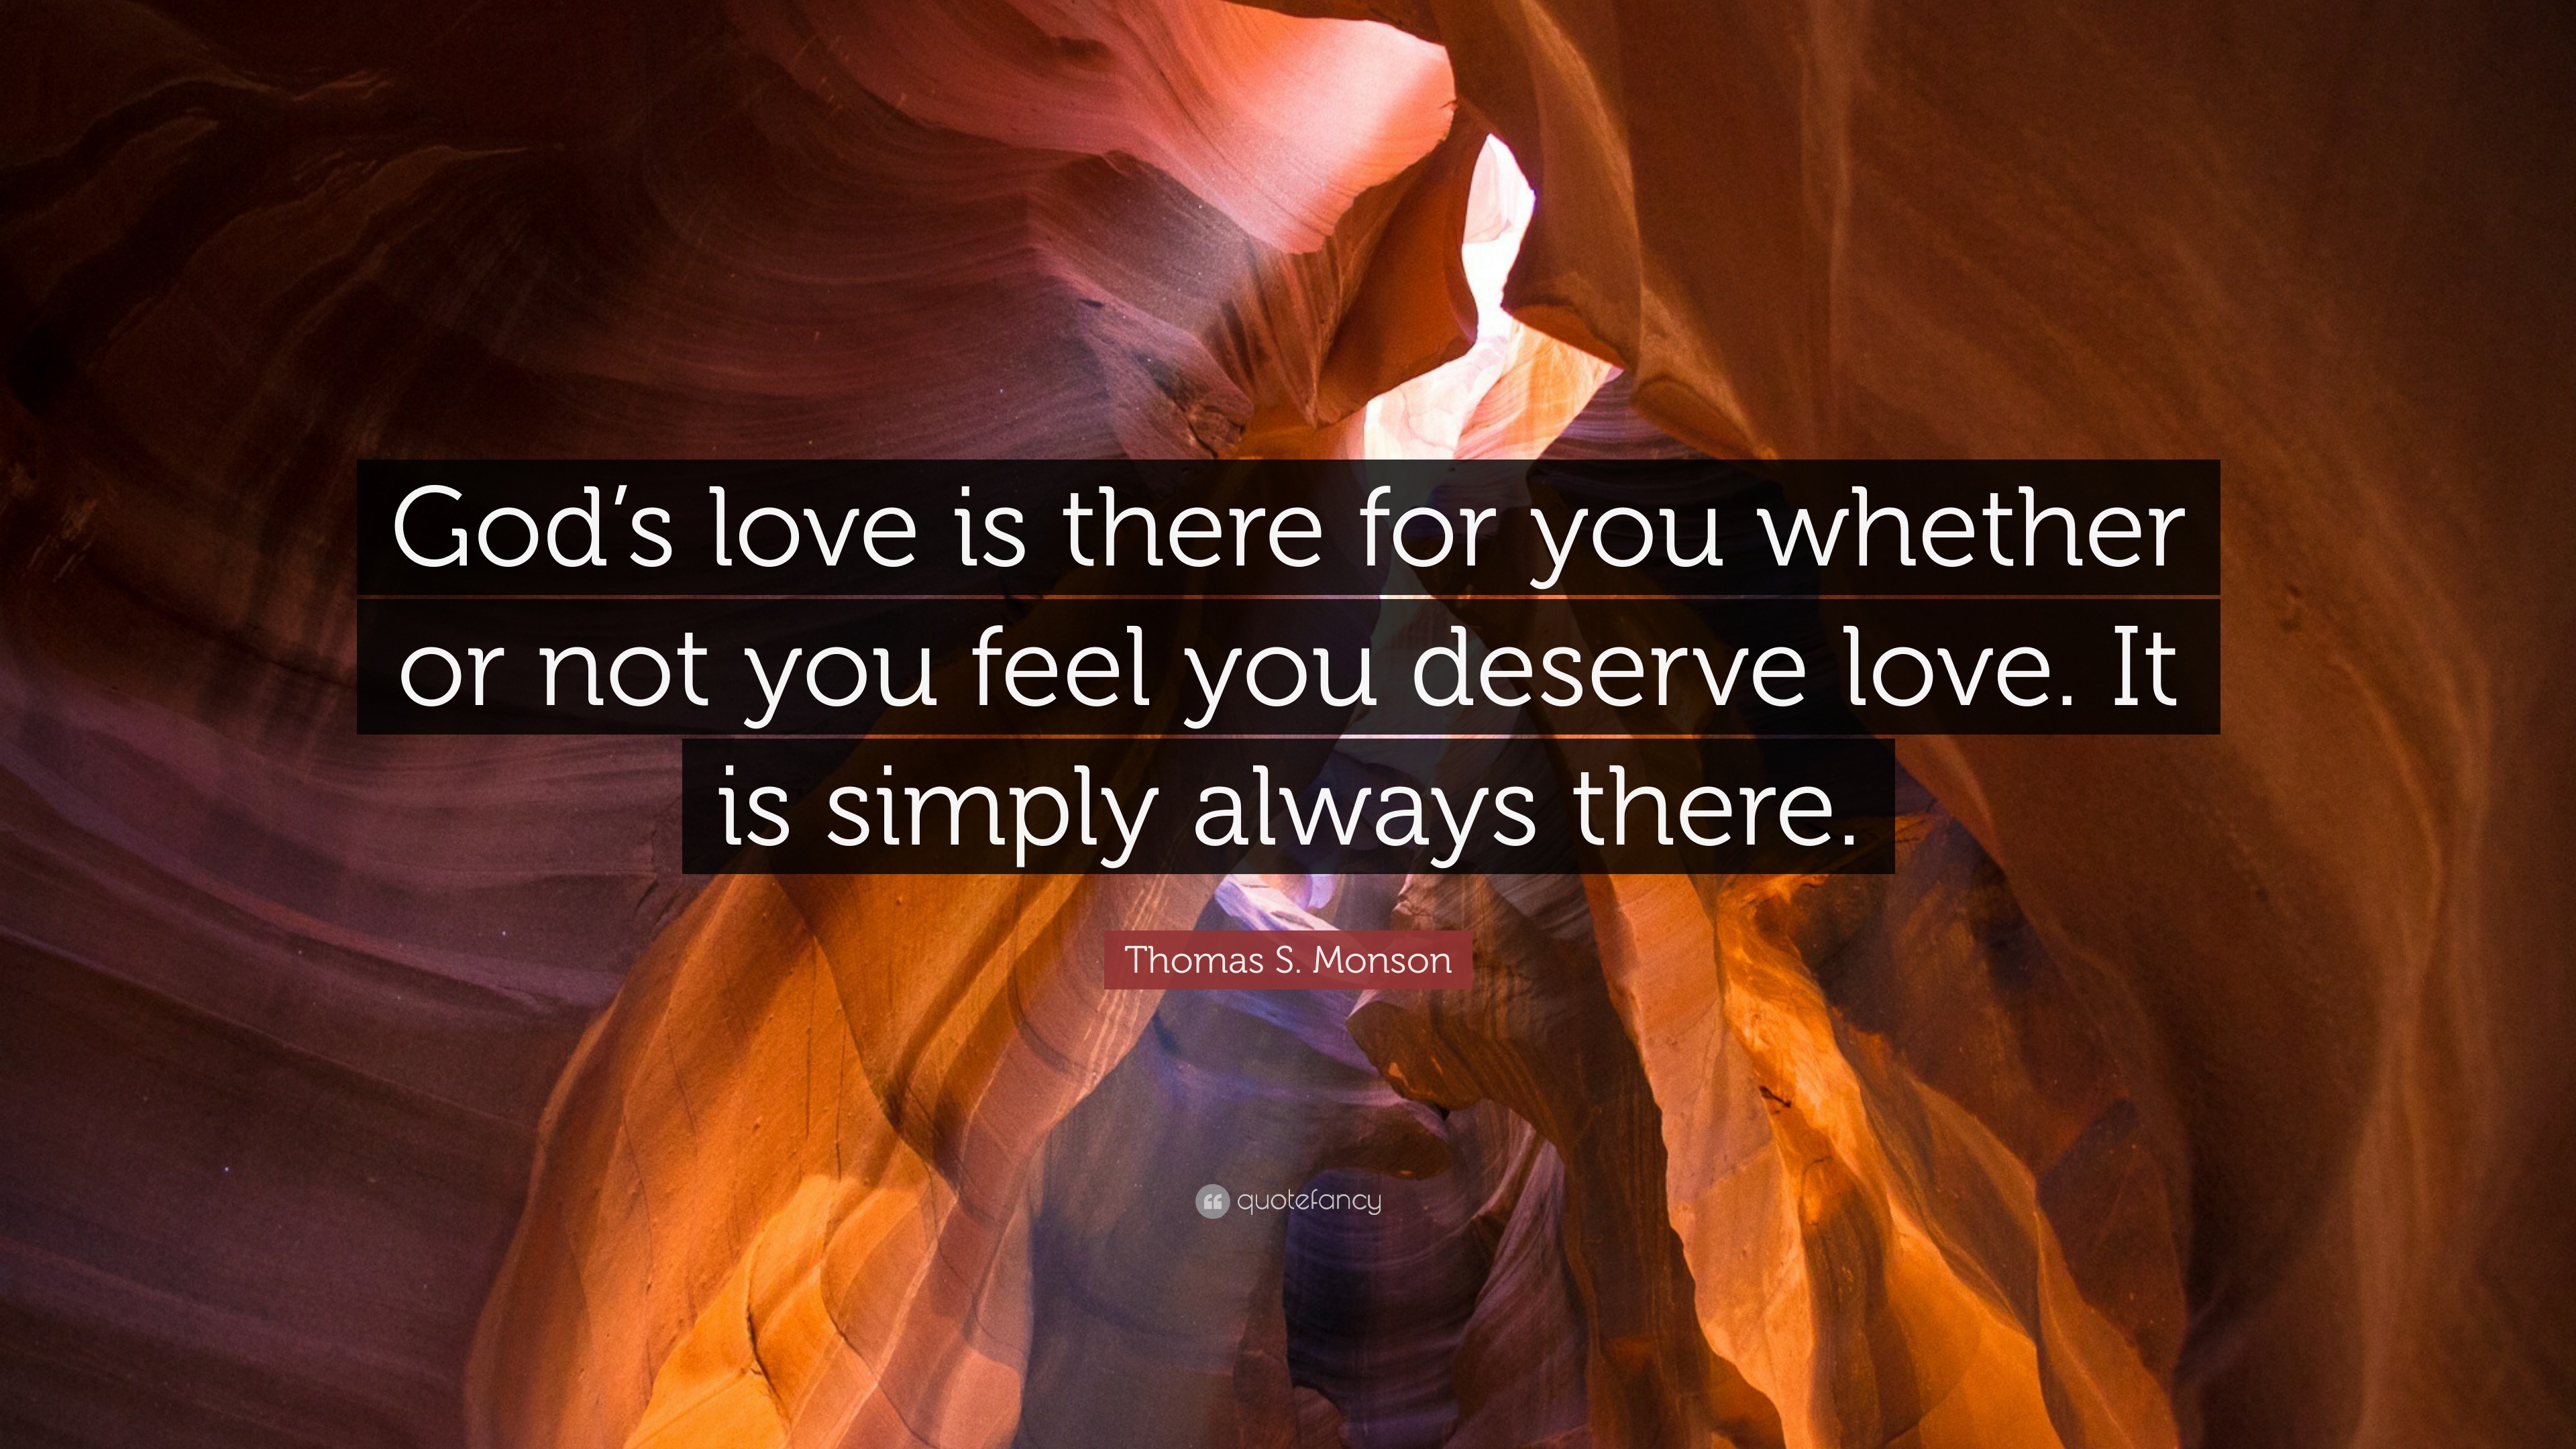 Thomas S. Monson Quote: “God's love is there for you whether or not you  feel you